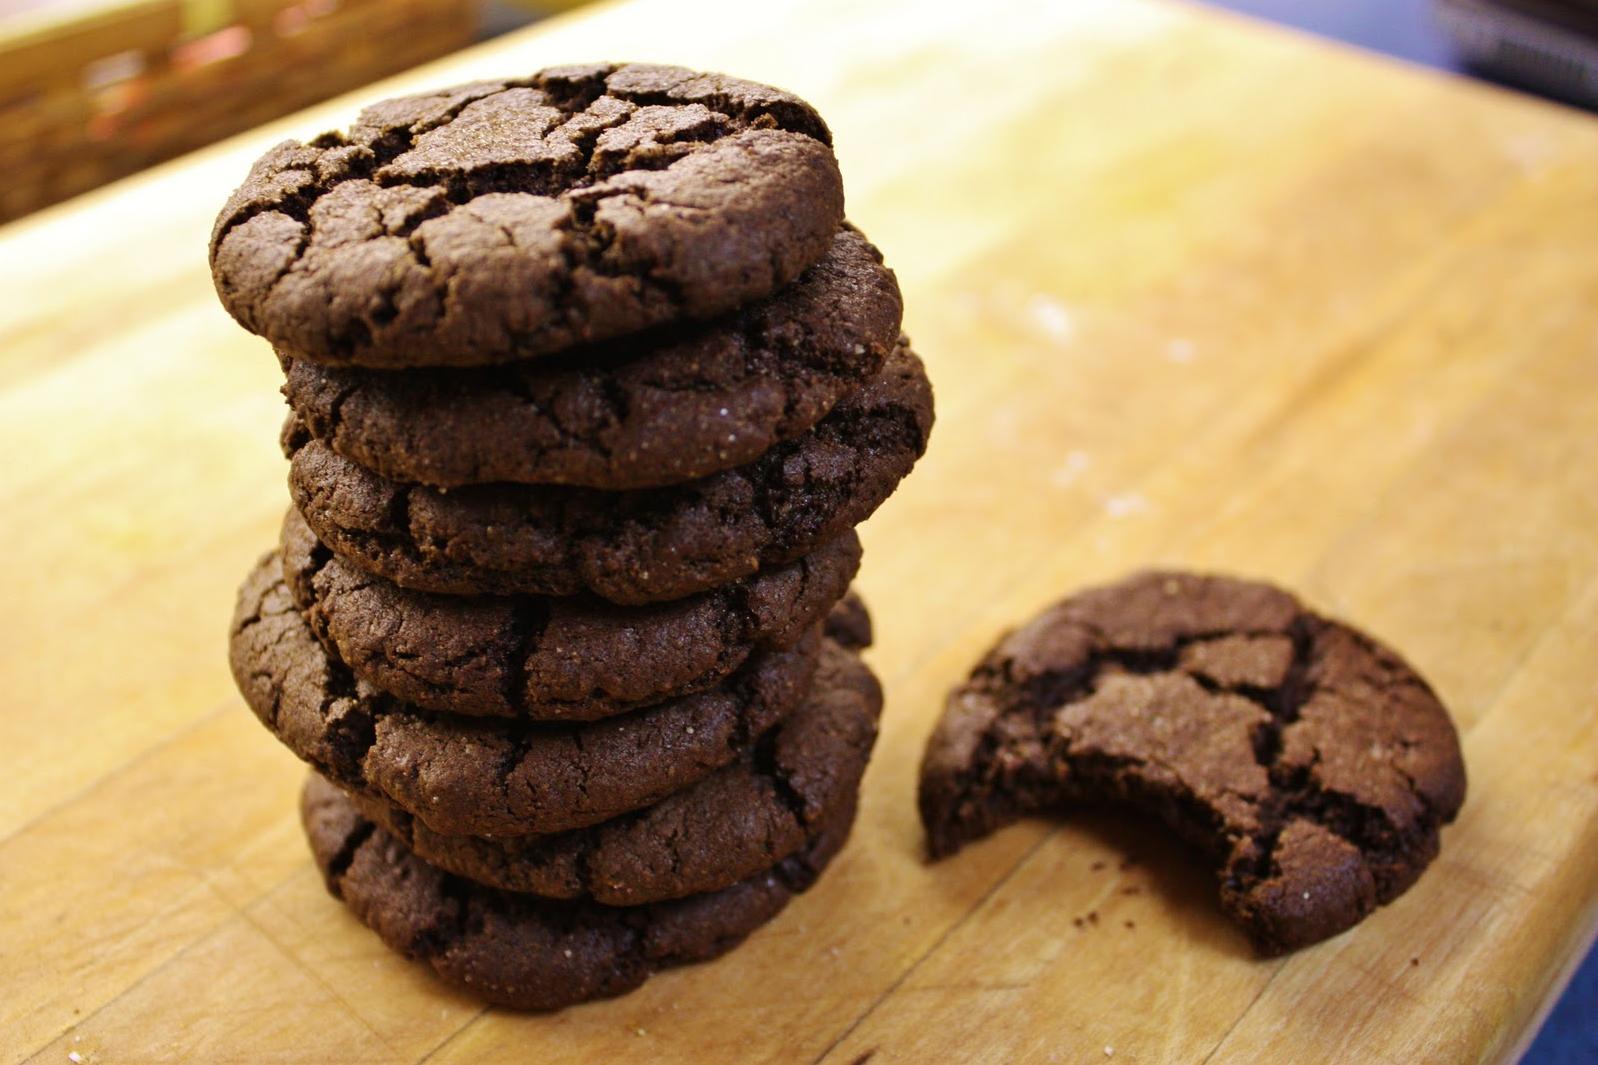  Get ready to indulge in the perfect combination of chocolate and spice with these Mexican Hot Chocolate Snickerdoodles!